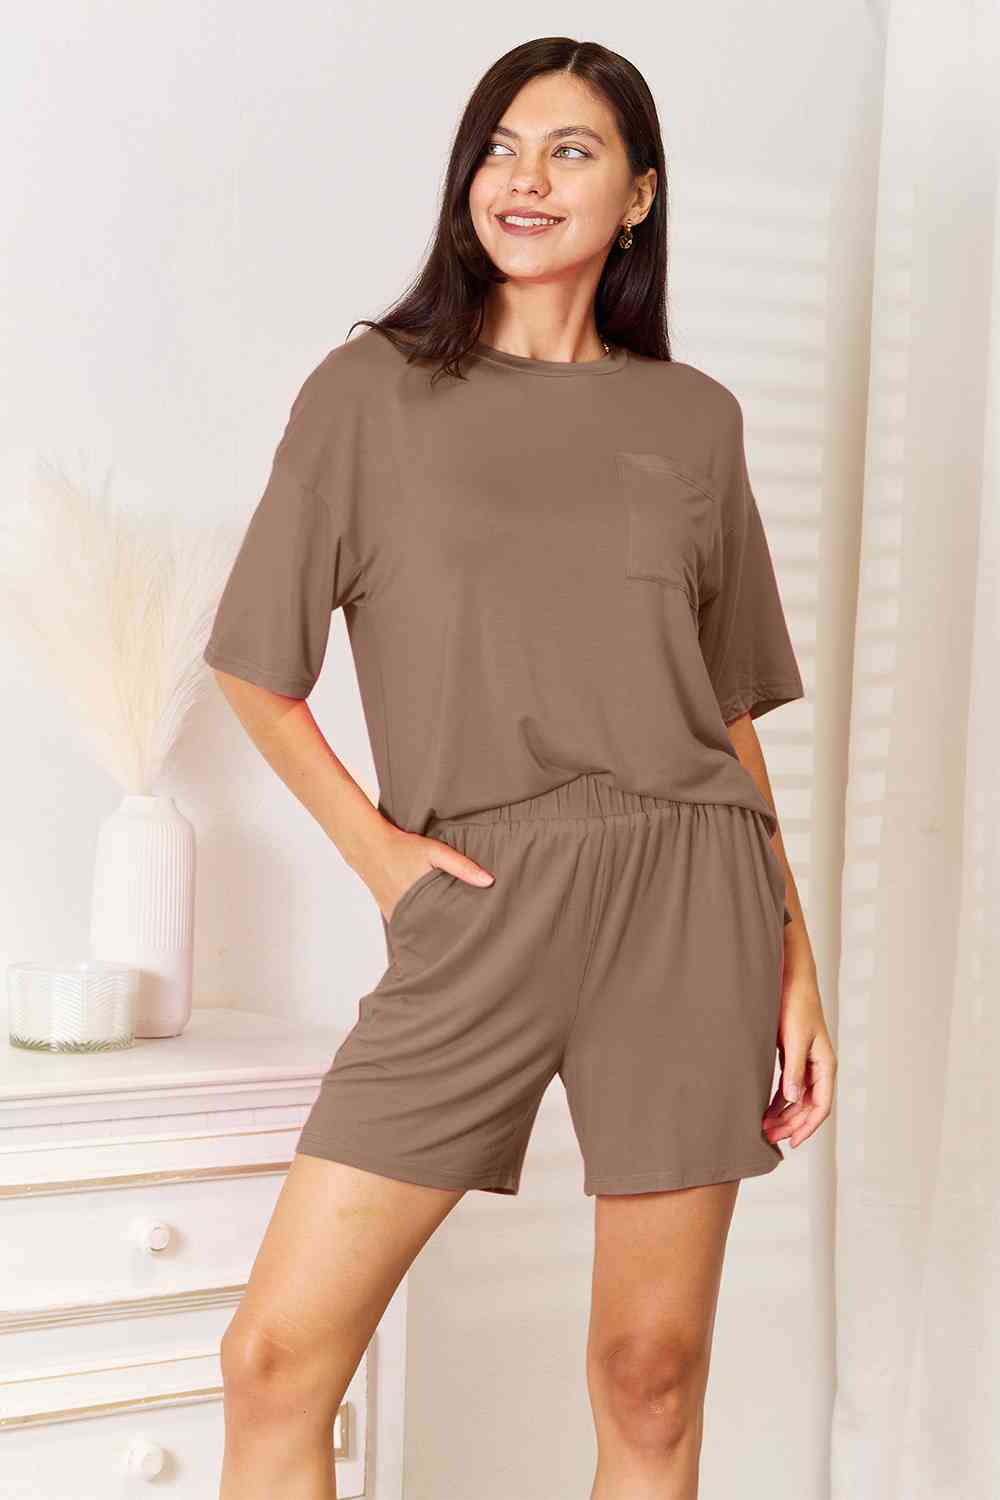 Soft Rayon Half Sleeve Top and Shorts Set - Taupe / S - Camis & Tops - Outfit Sets - 13 - 2024